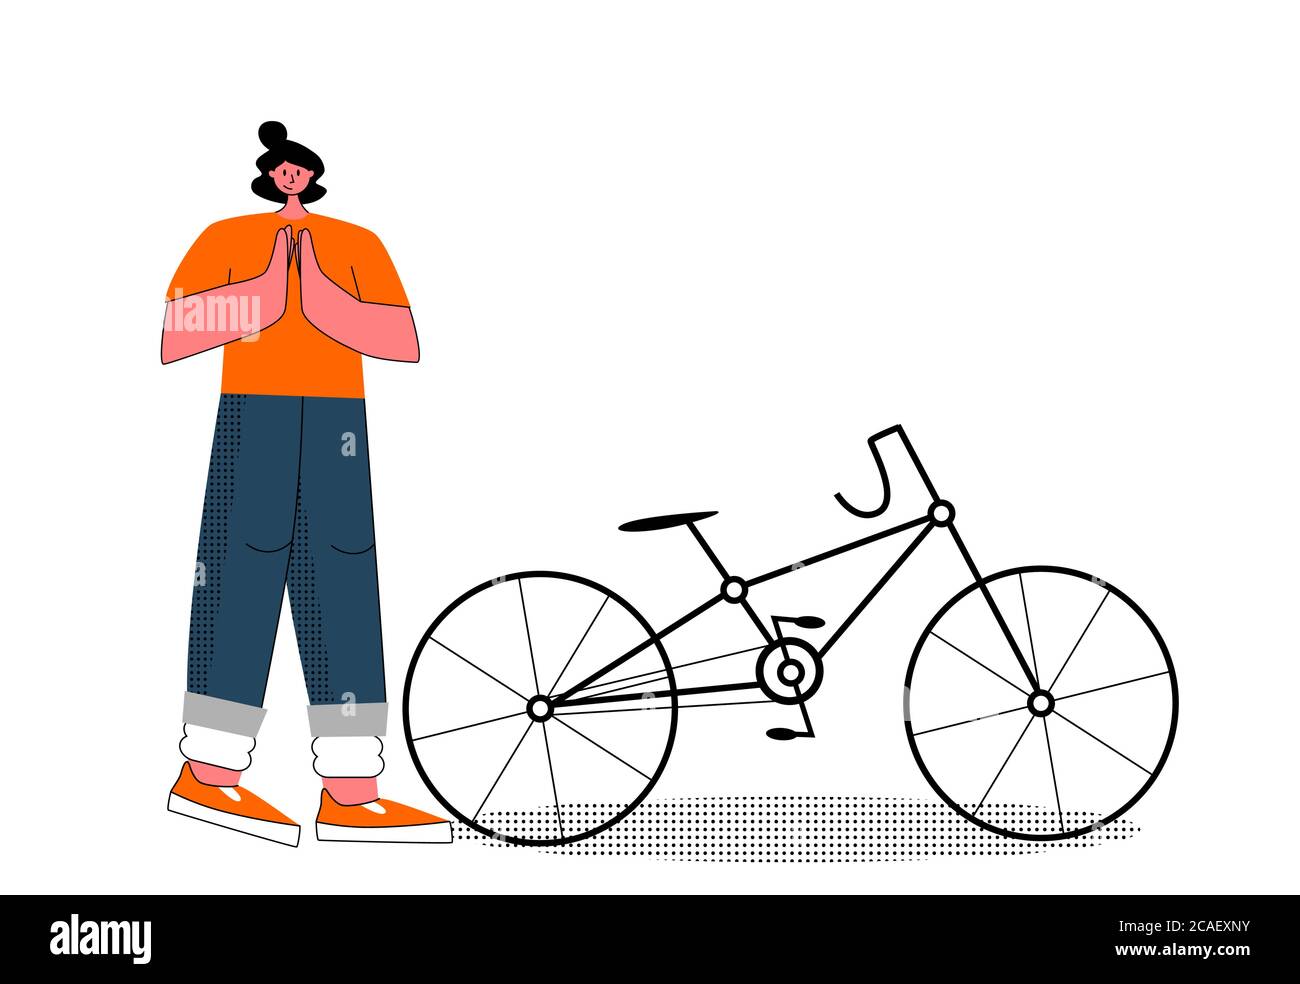 Bicycle Repair. Flat style vector illustration. Stock Vector